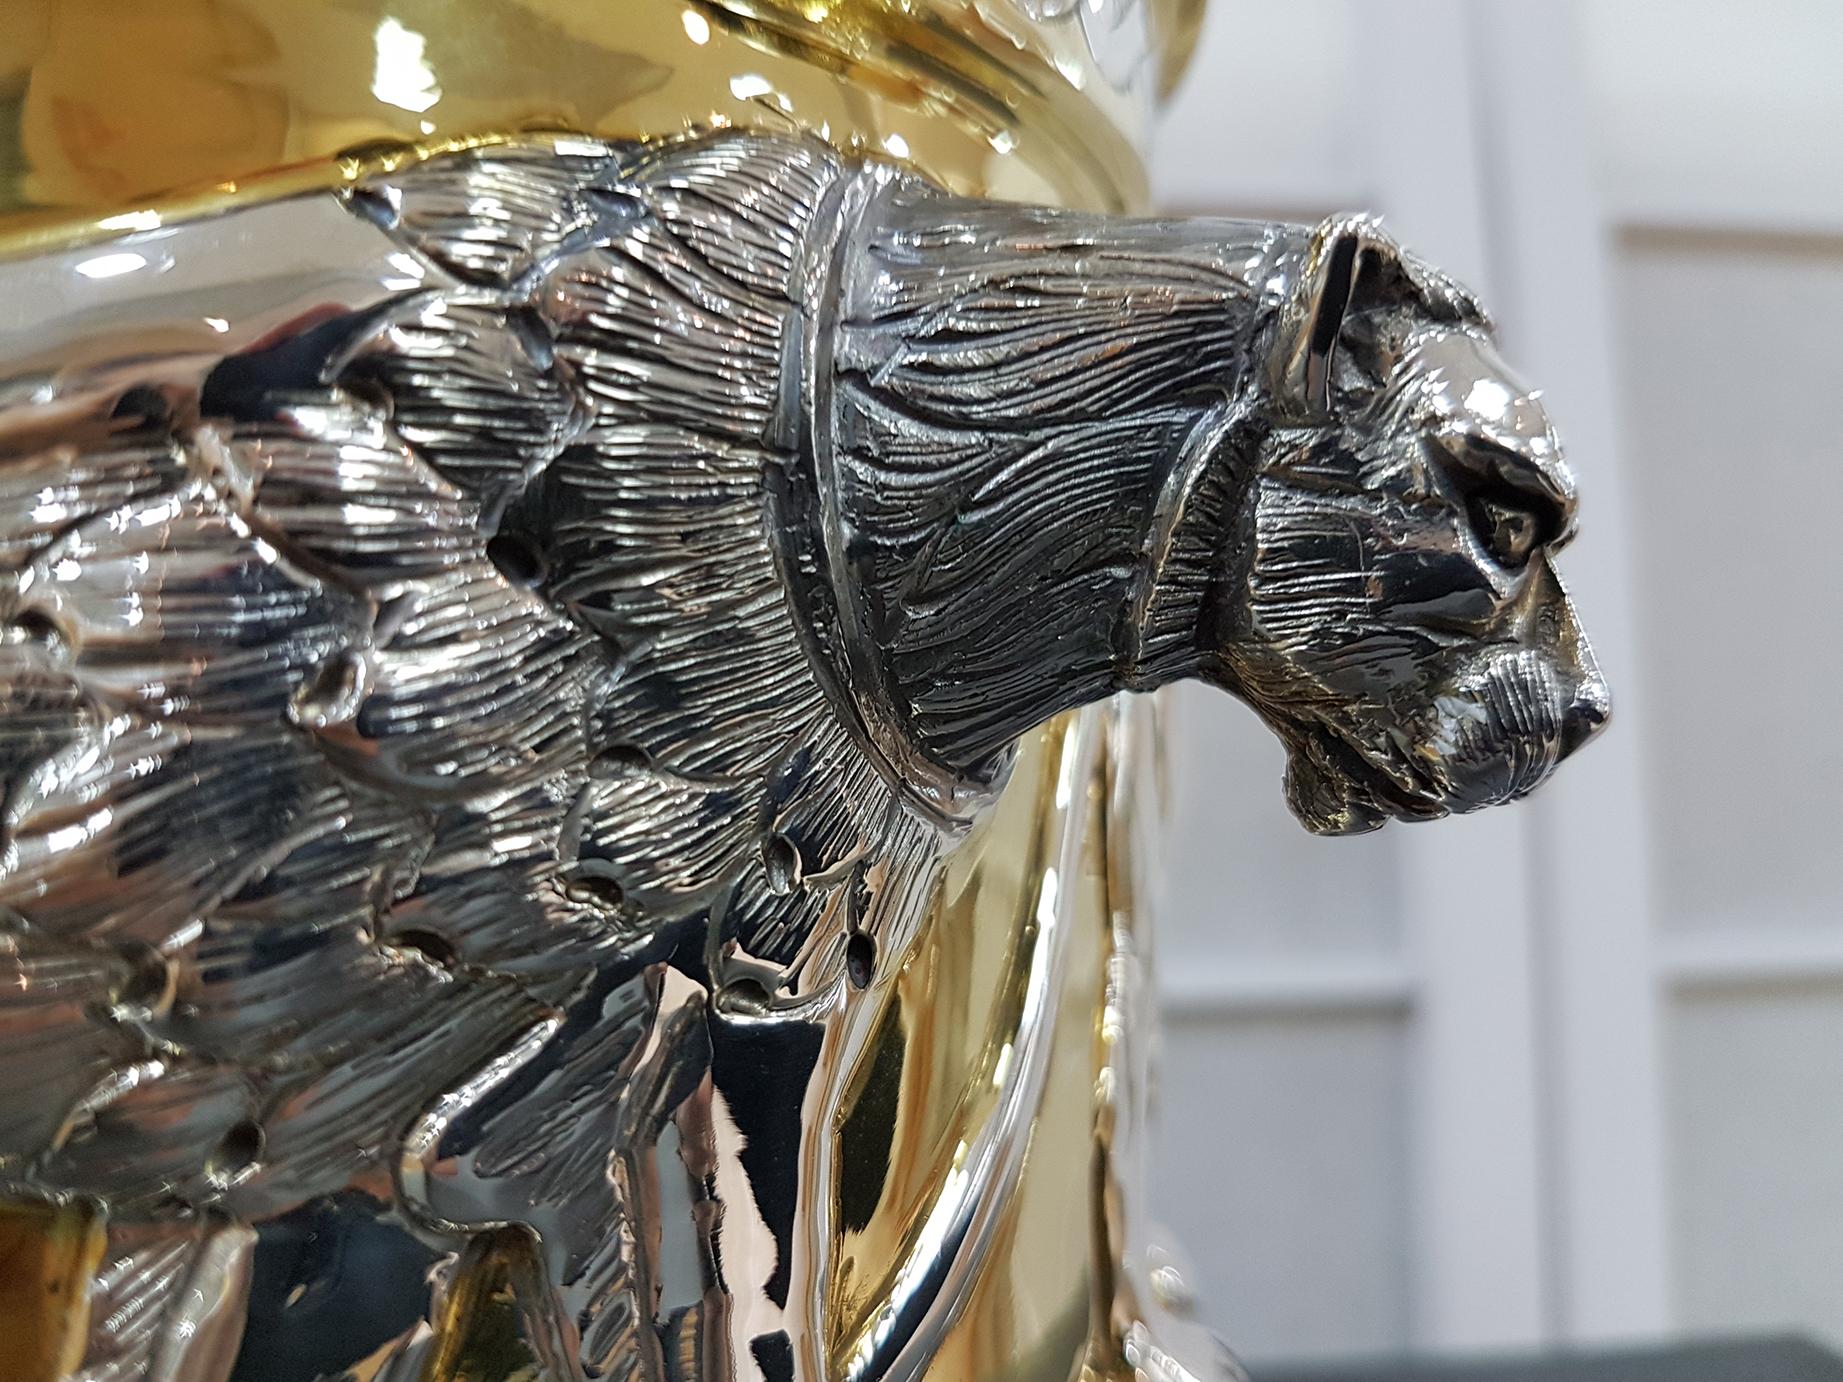 Italian 20th century partially gilded sterling silver ice bucket with lions.
Possibility to use it as a flowerpot centerpiece during dinners or elegant lunches



 